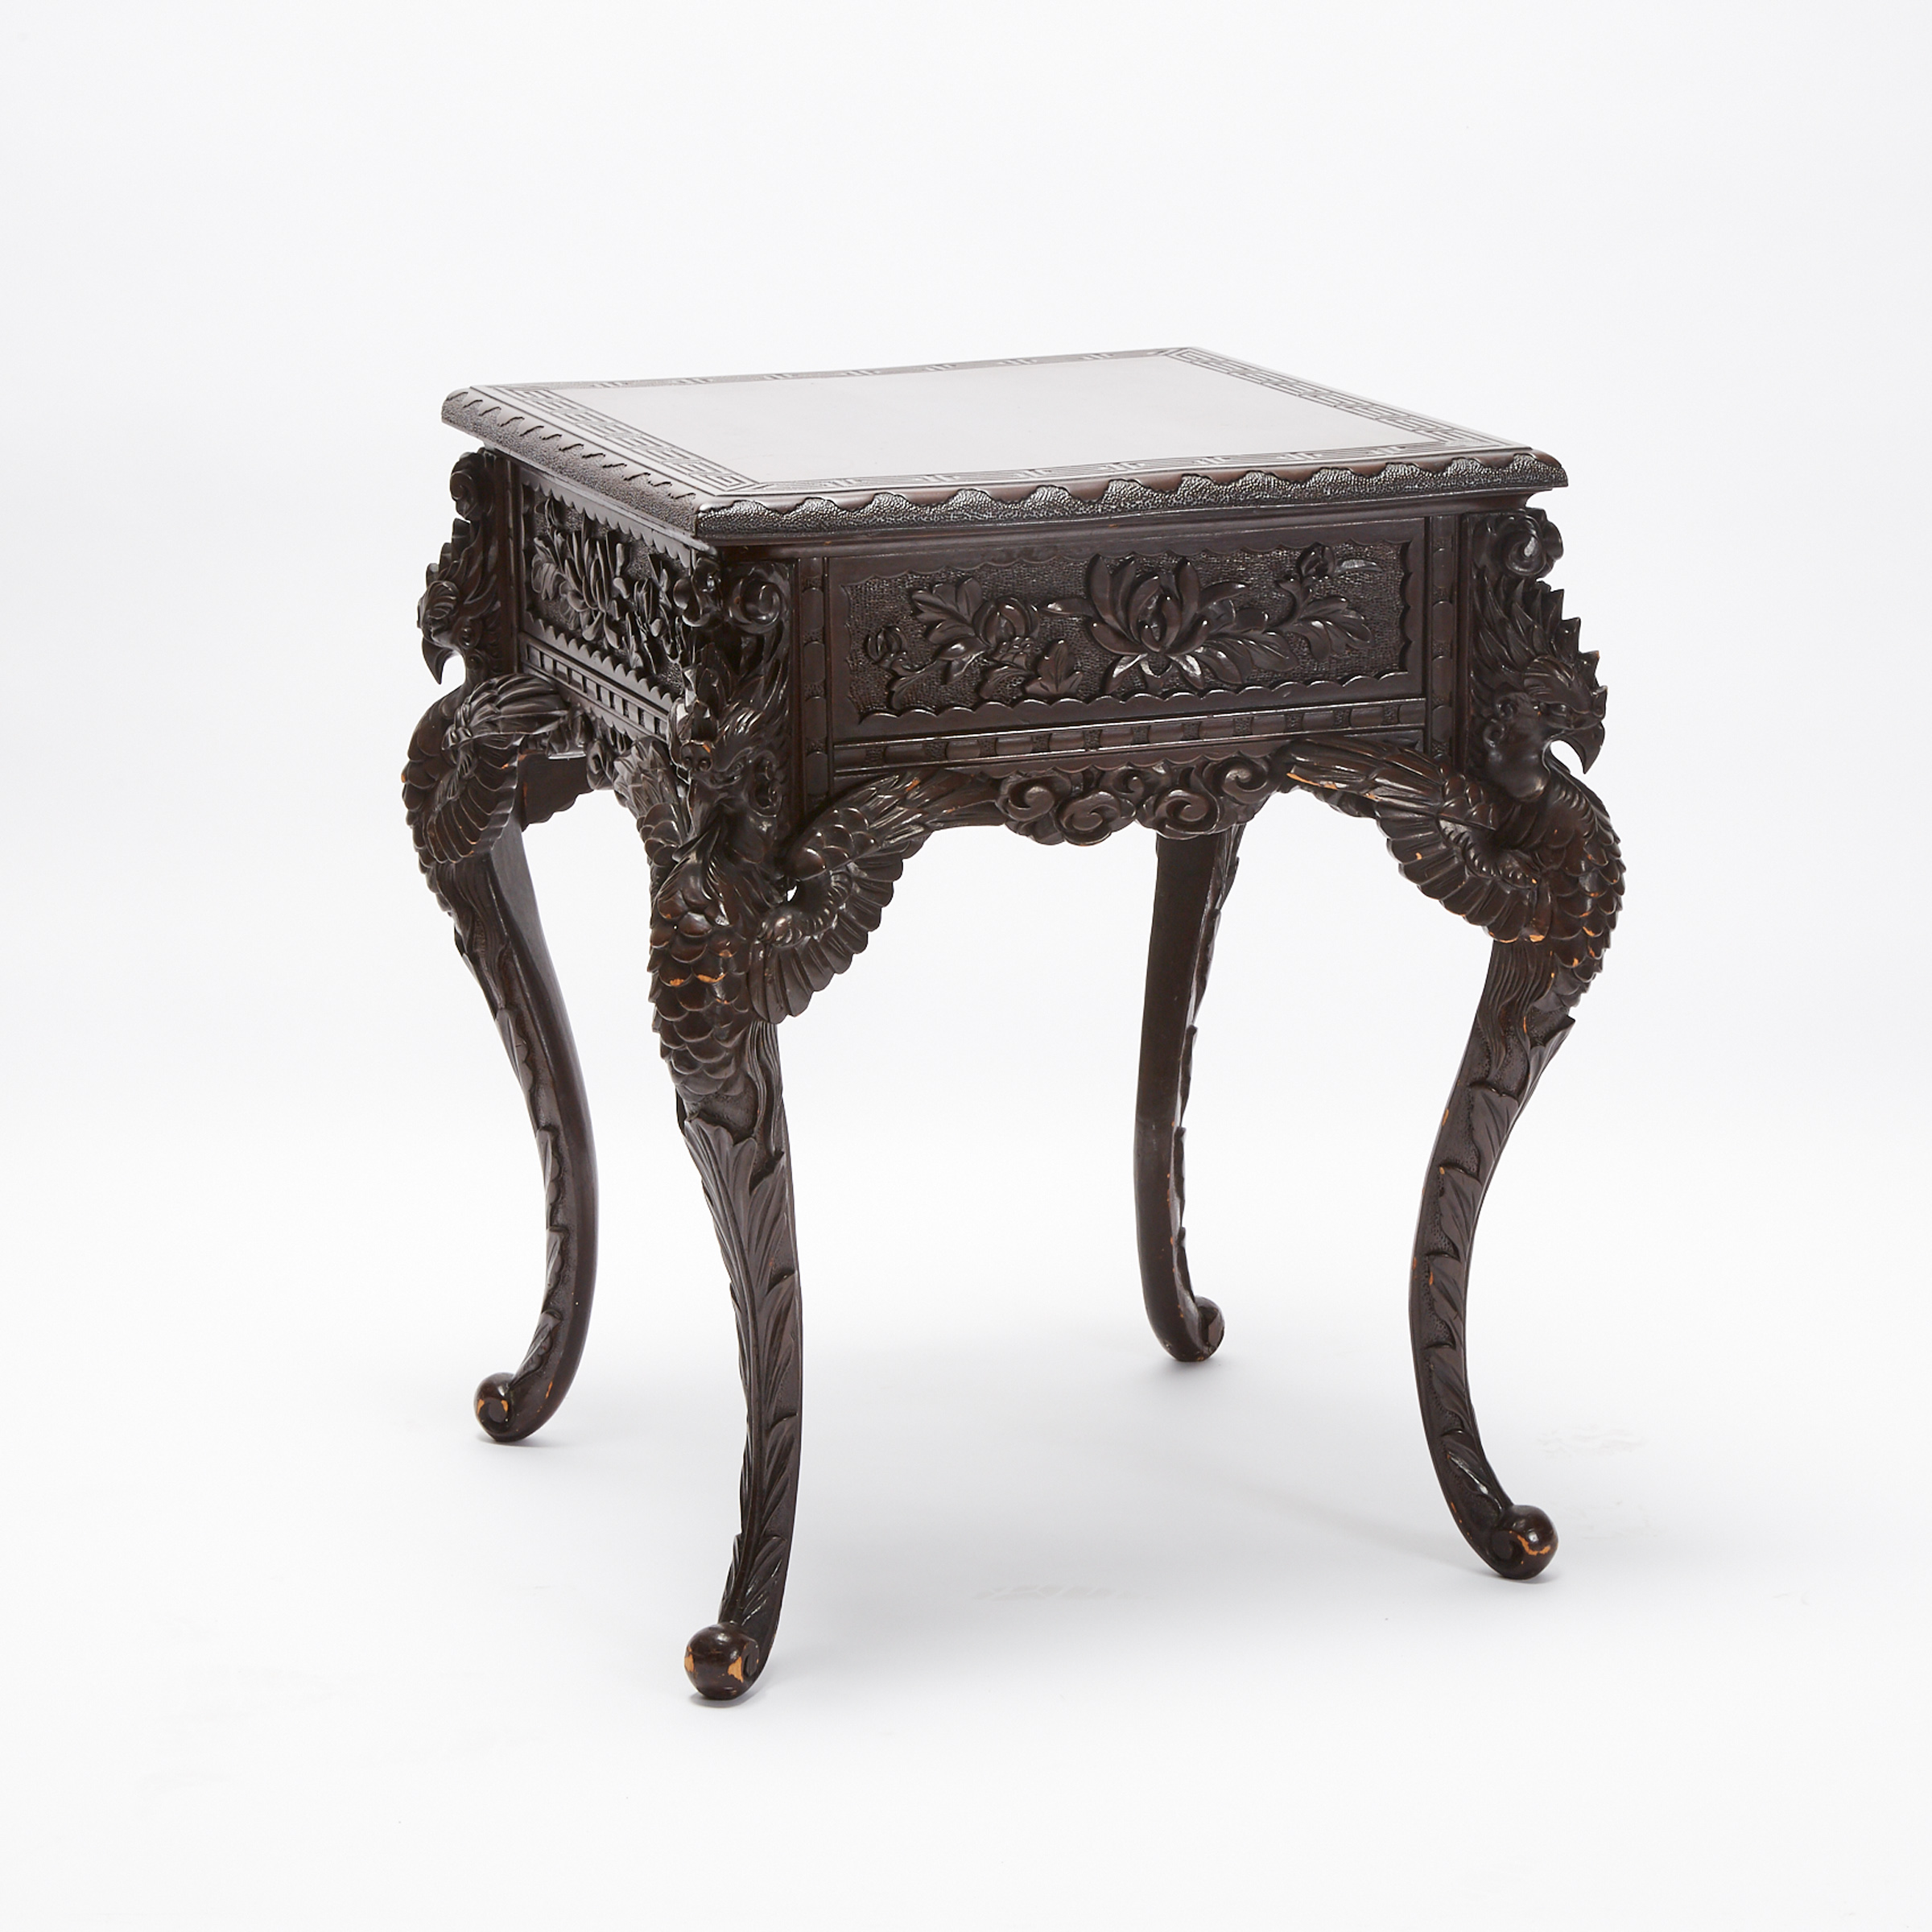 Renaissance Revival Carved Walnut Lamp Table, early 20th century